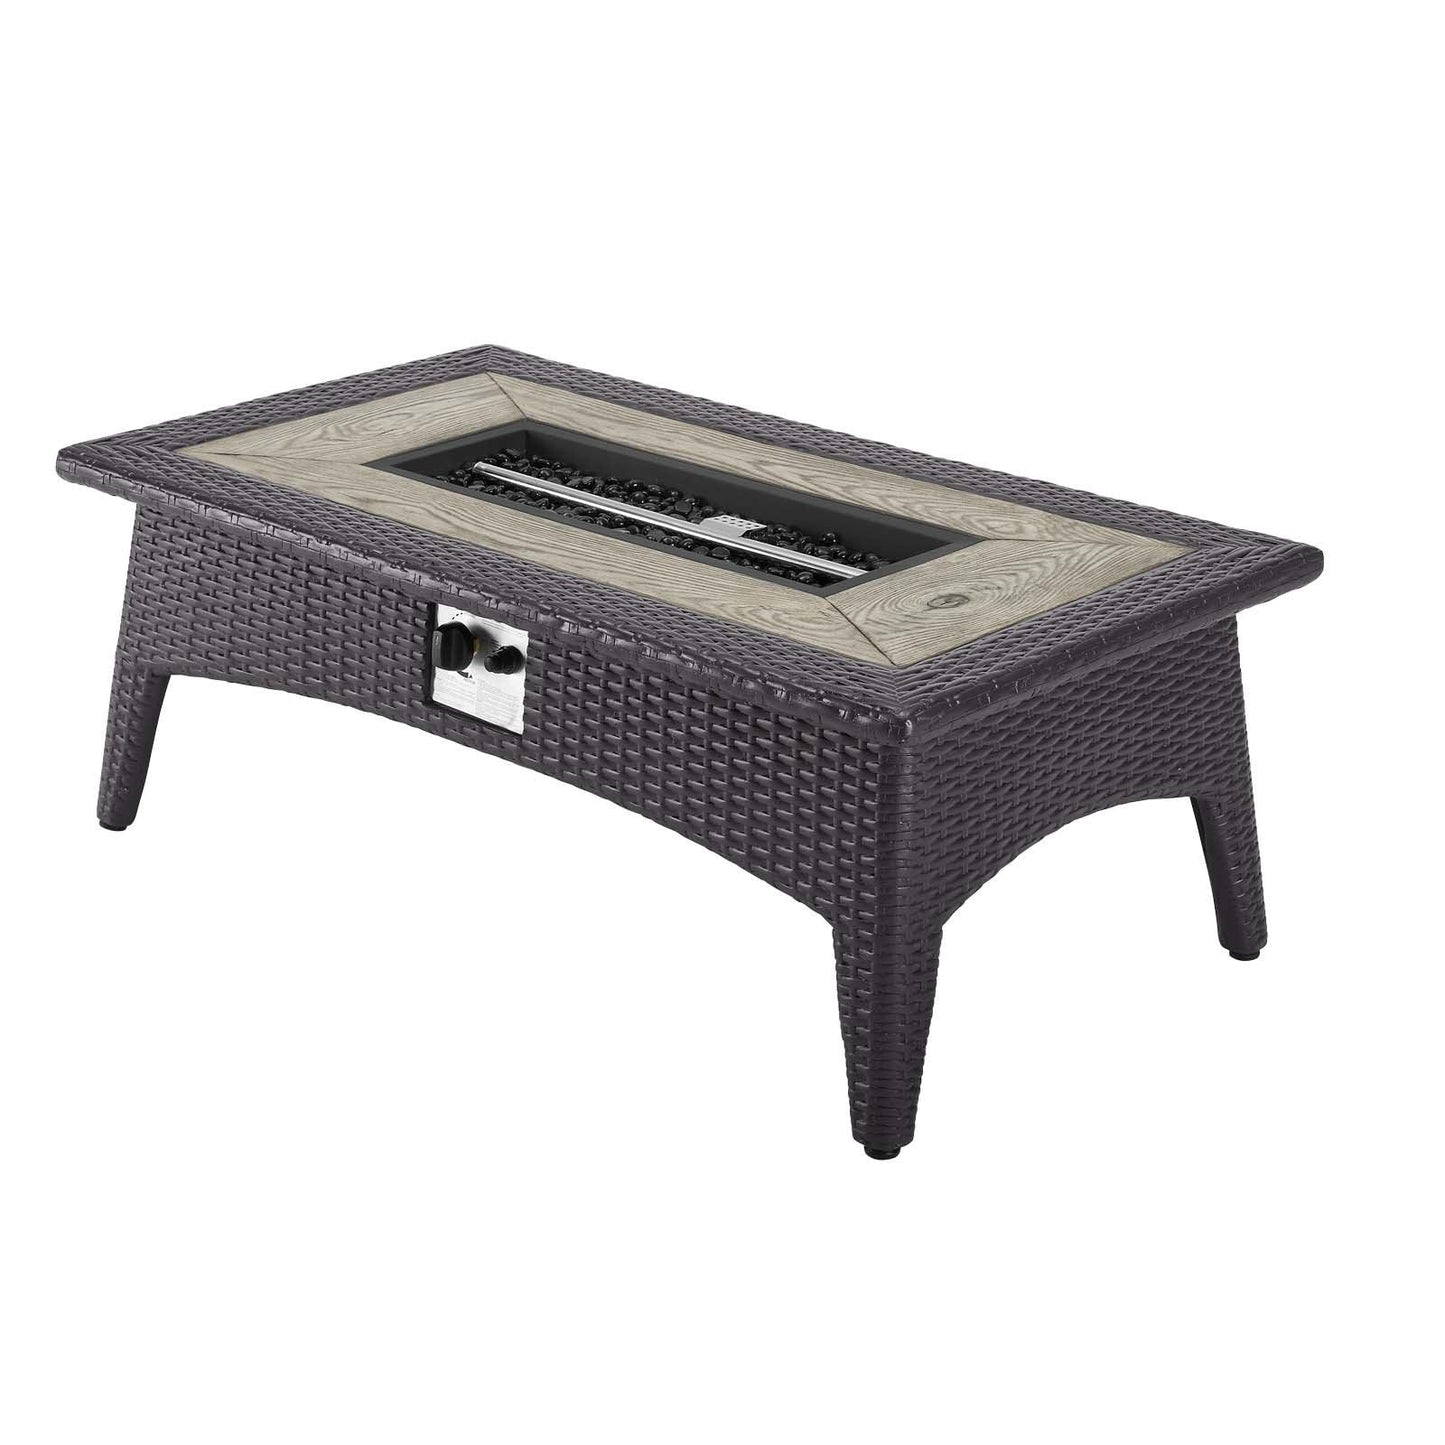 Modway Splendor 43.5" Rectangle Outdoor Patio Fire Pit Table FredCo